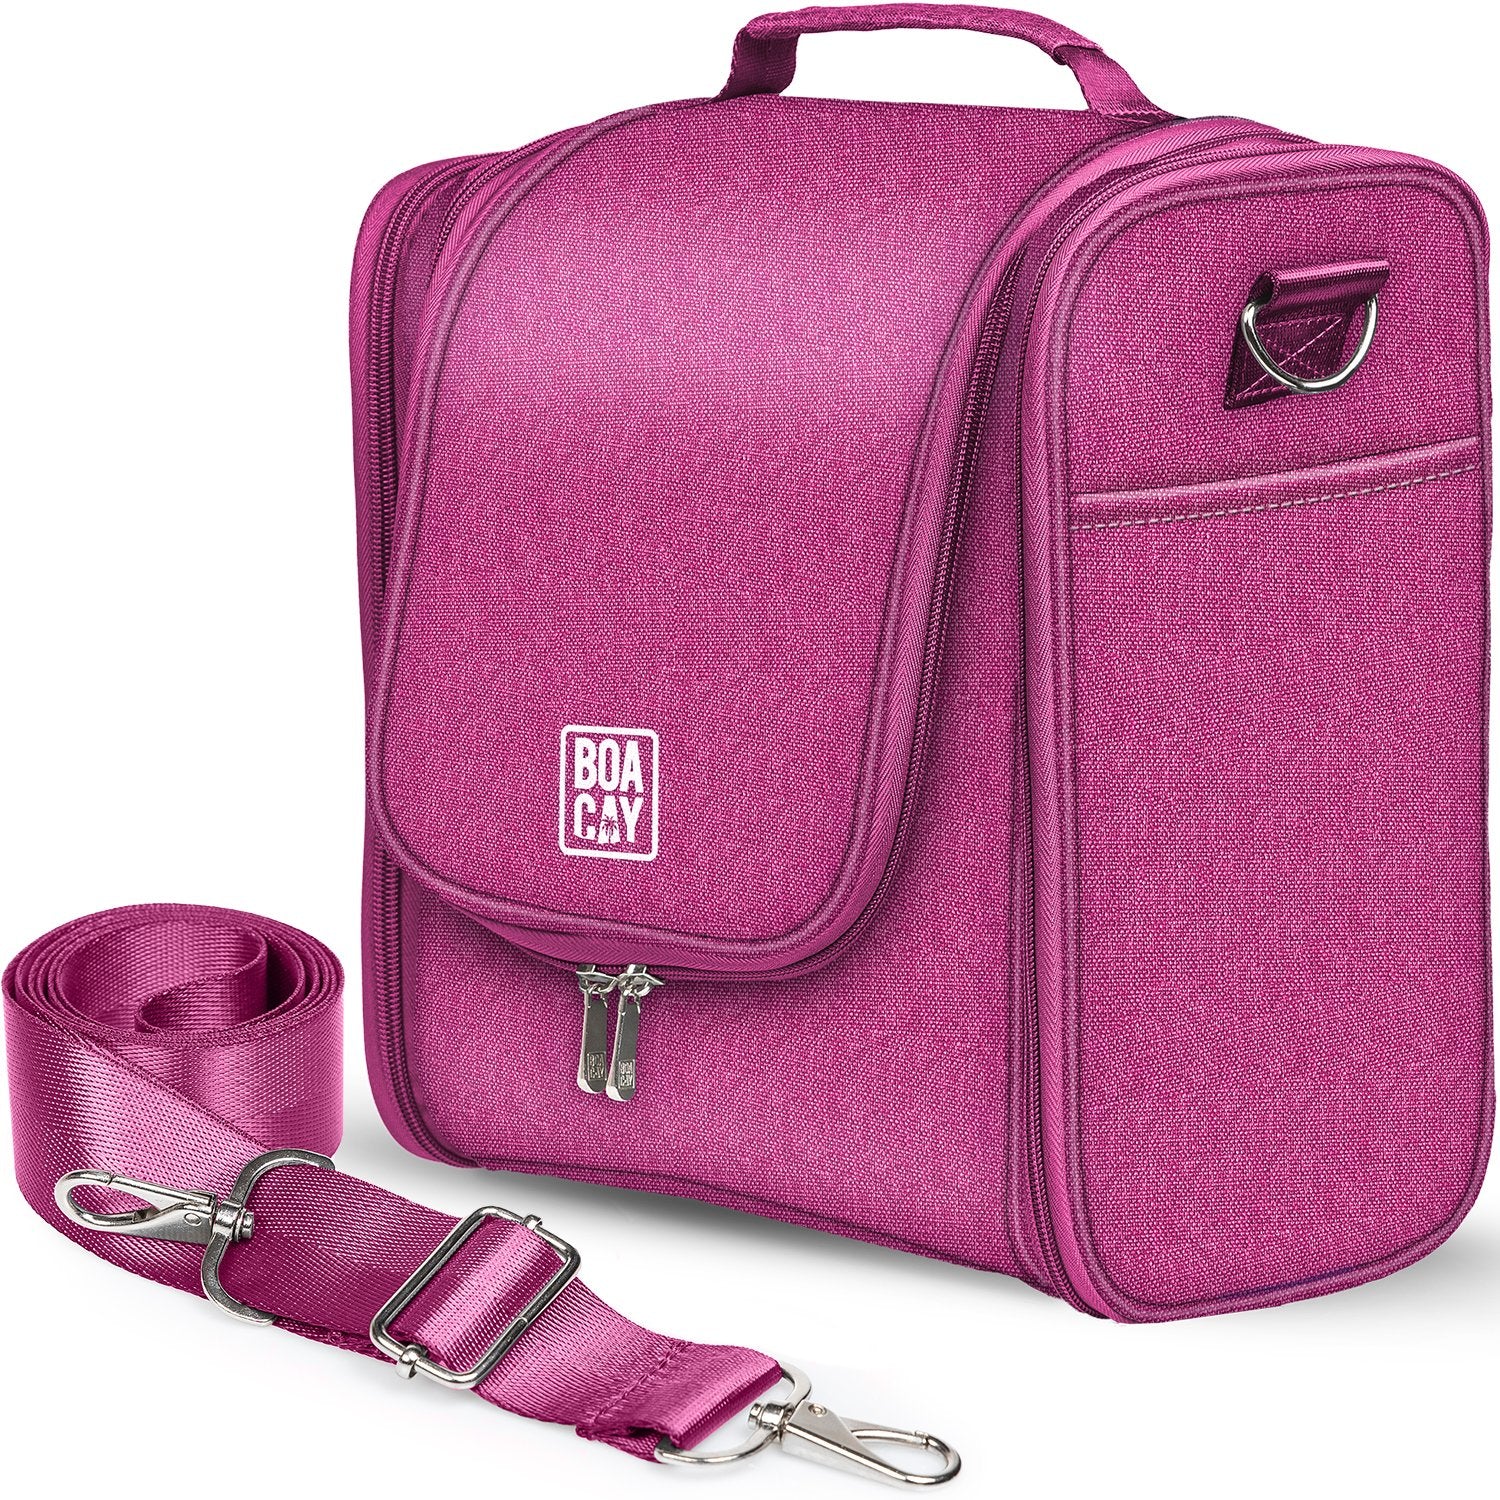 Cerise Pink Extra-Large Travel Toiletry Bag for Women and Men - Boacay